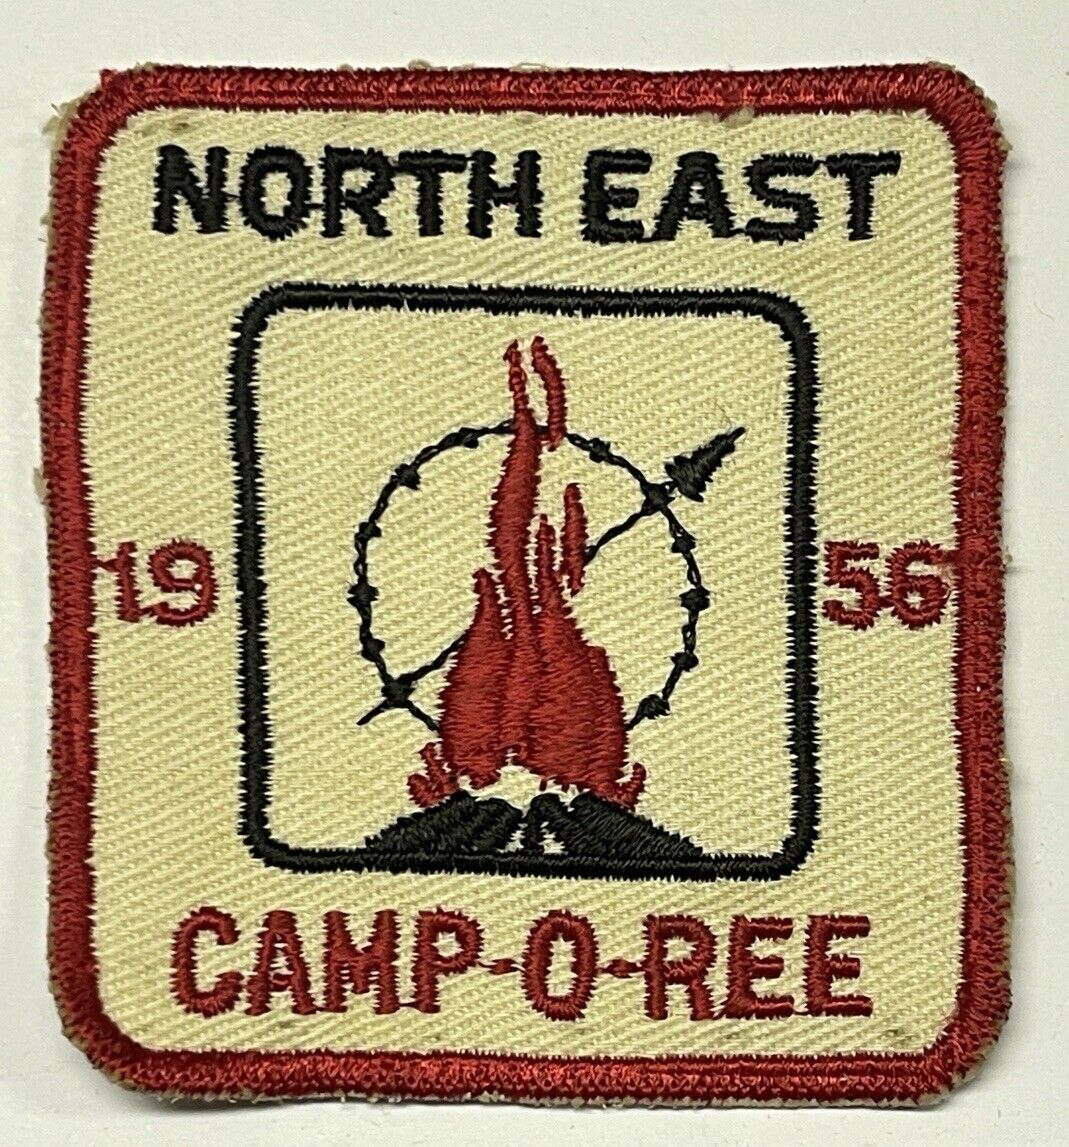 North East District Patch 1956 Camporee Milwaukee County Council Wisconsin WI